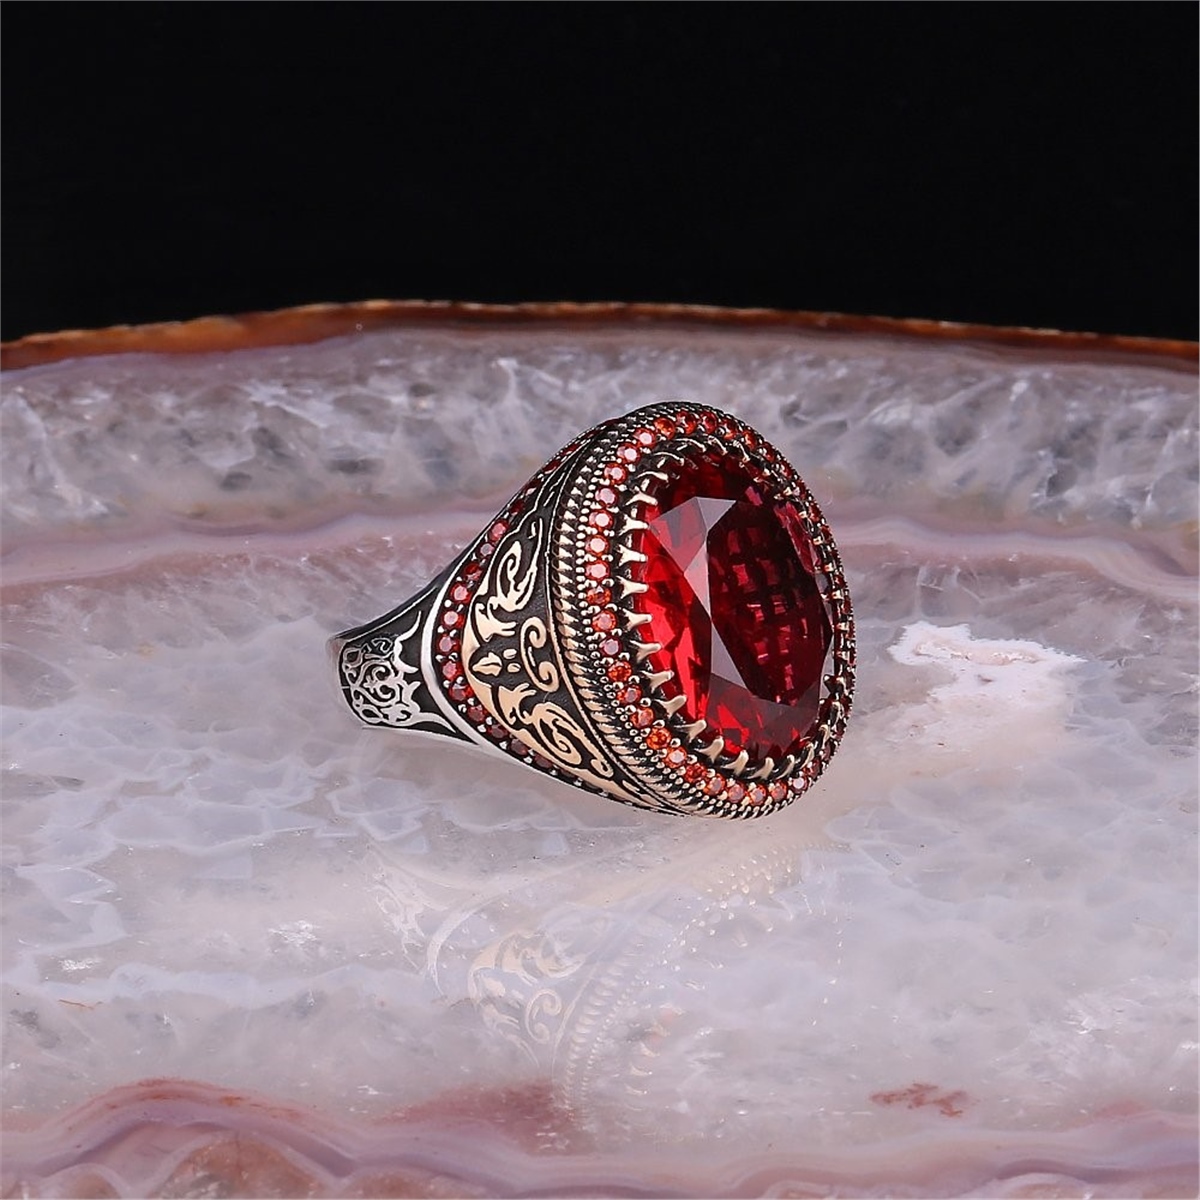 Red Aqua Stone 925 Sterling Silver Men's Ring